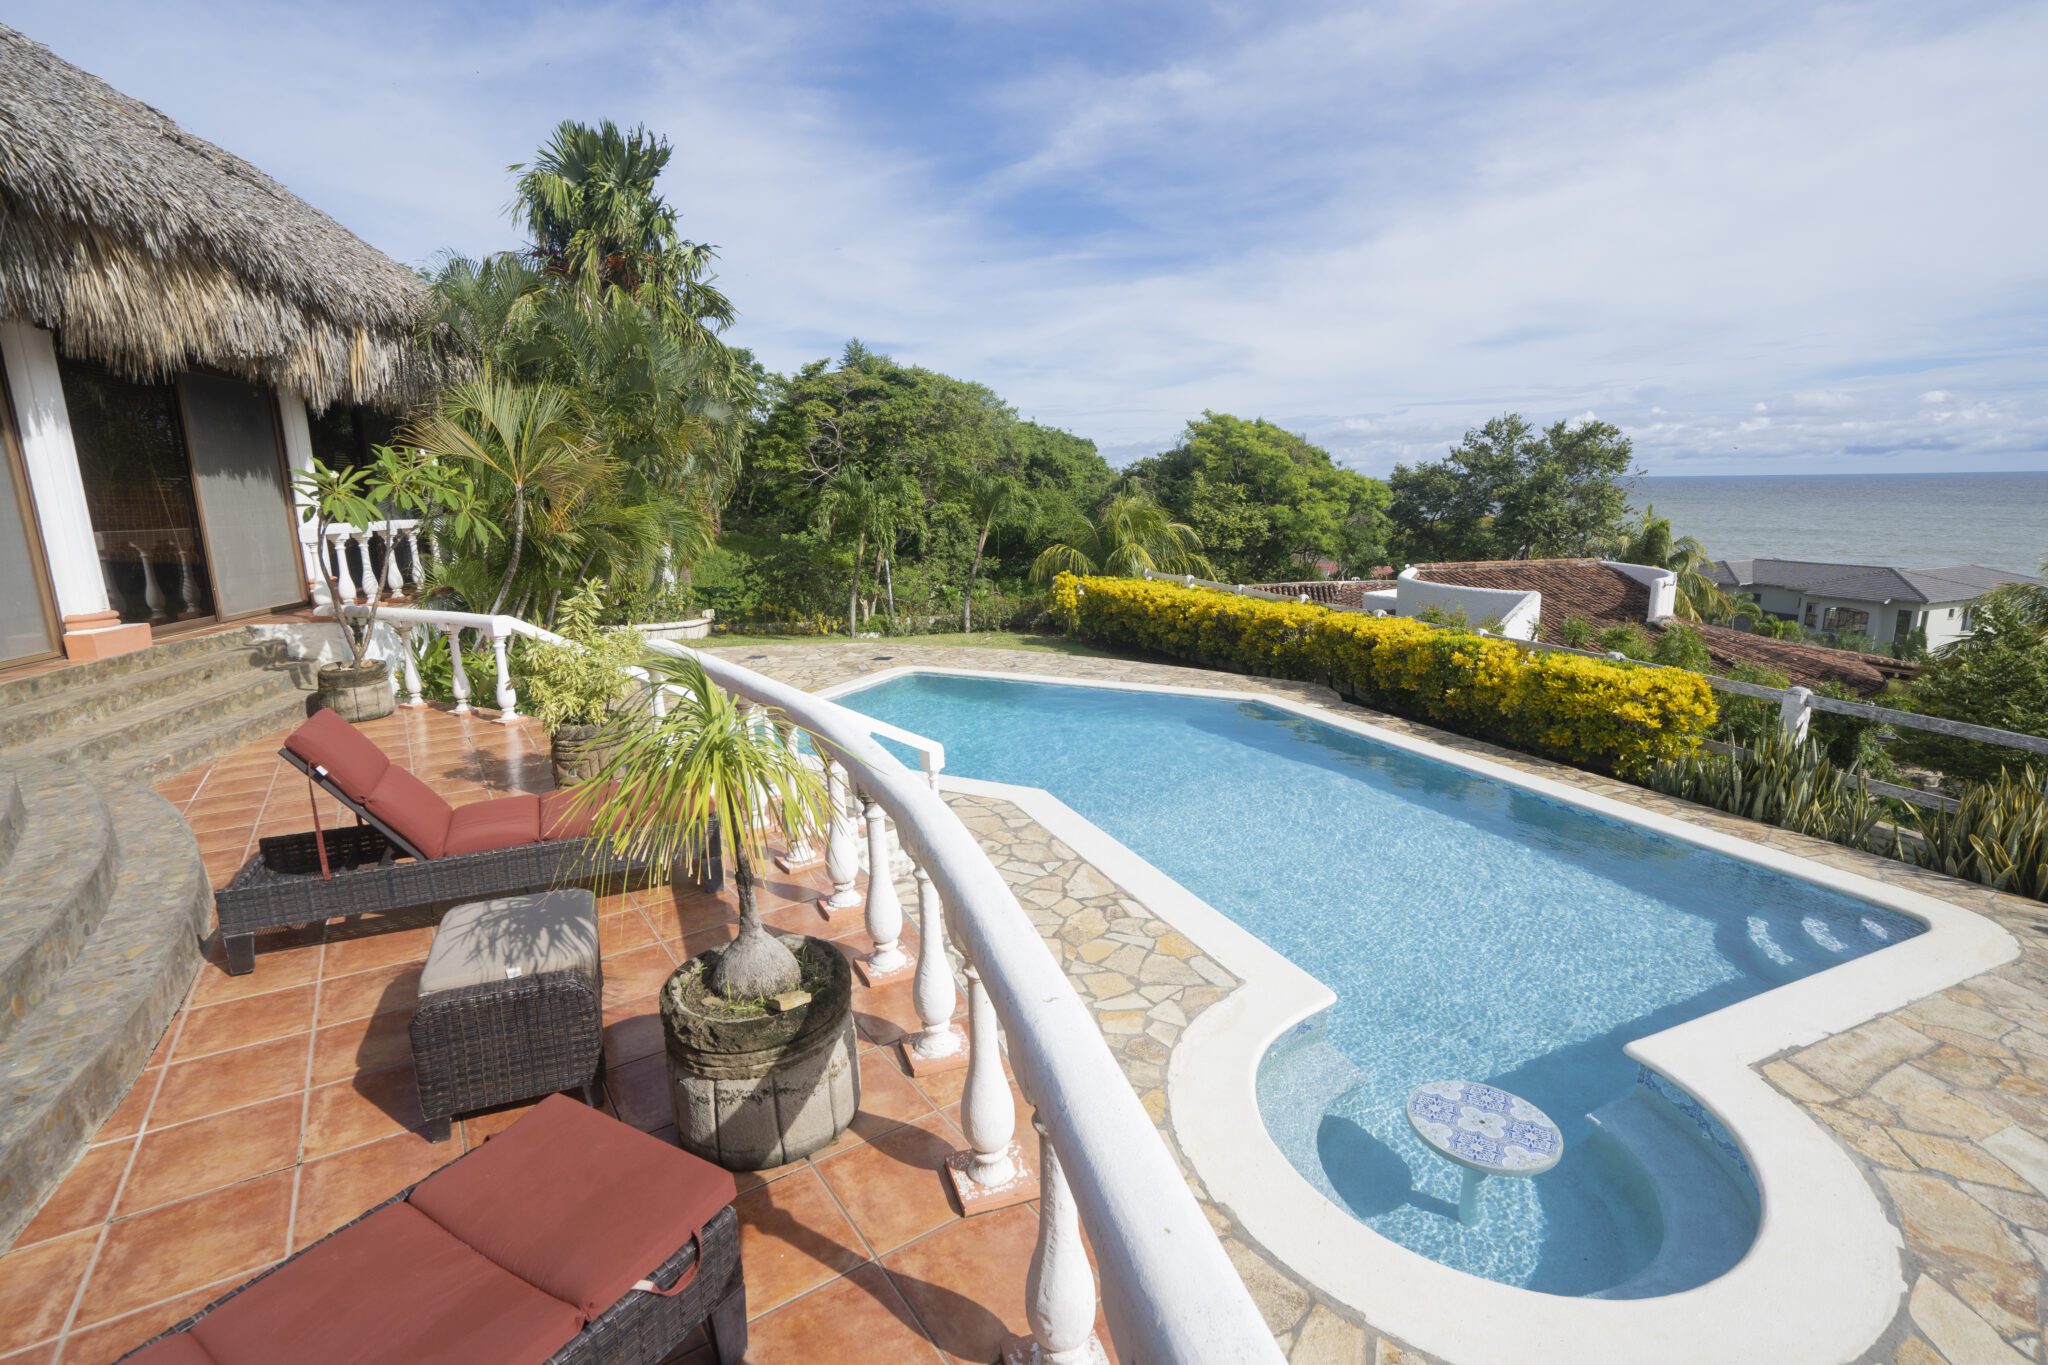 http://view%20of%20the%20pool%20from%20a%20Rancho%20Santana%20Property%20for%20Sale%20in%20Nicaragua%20B13